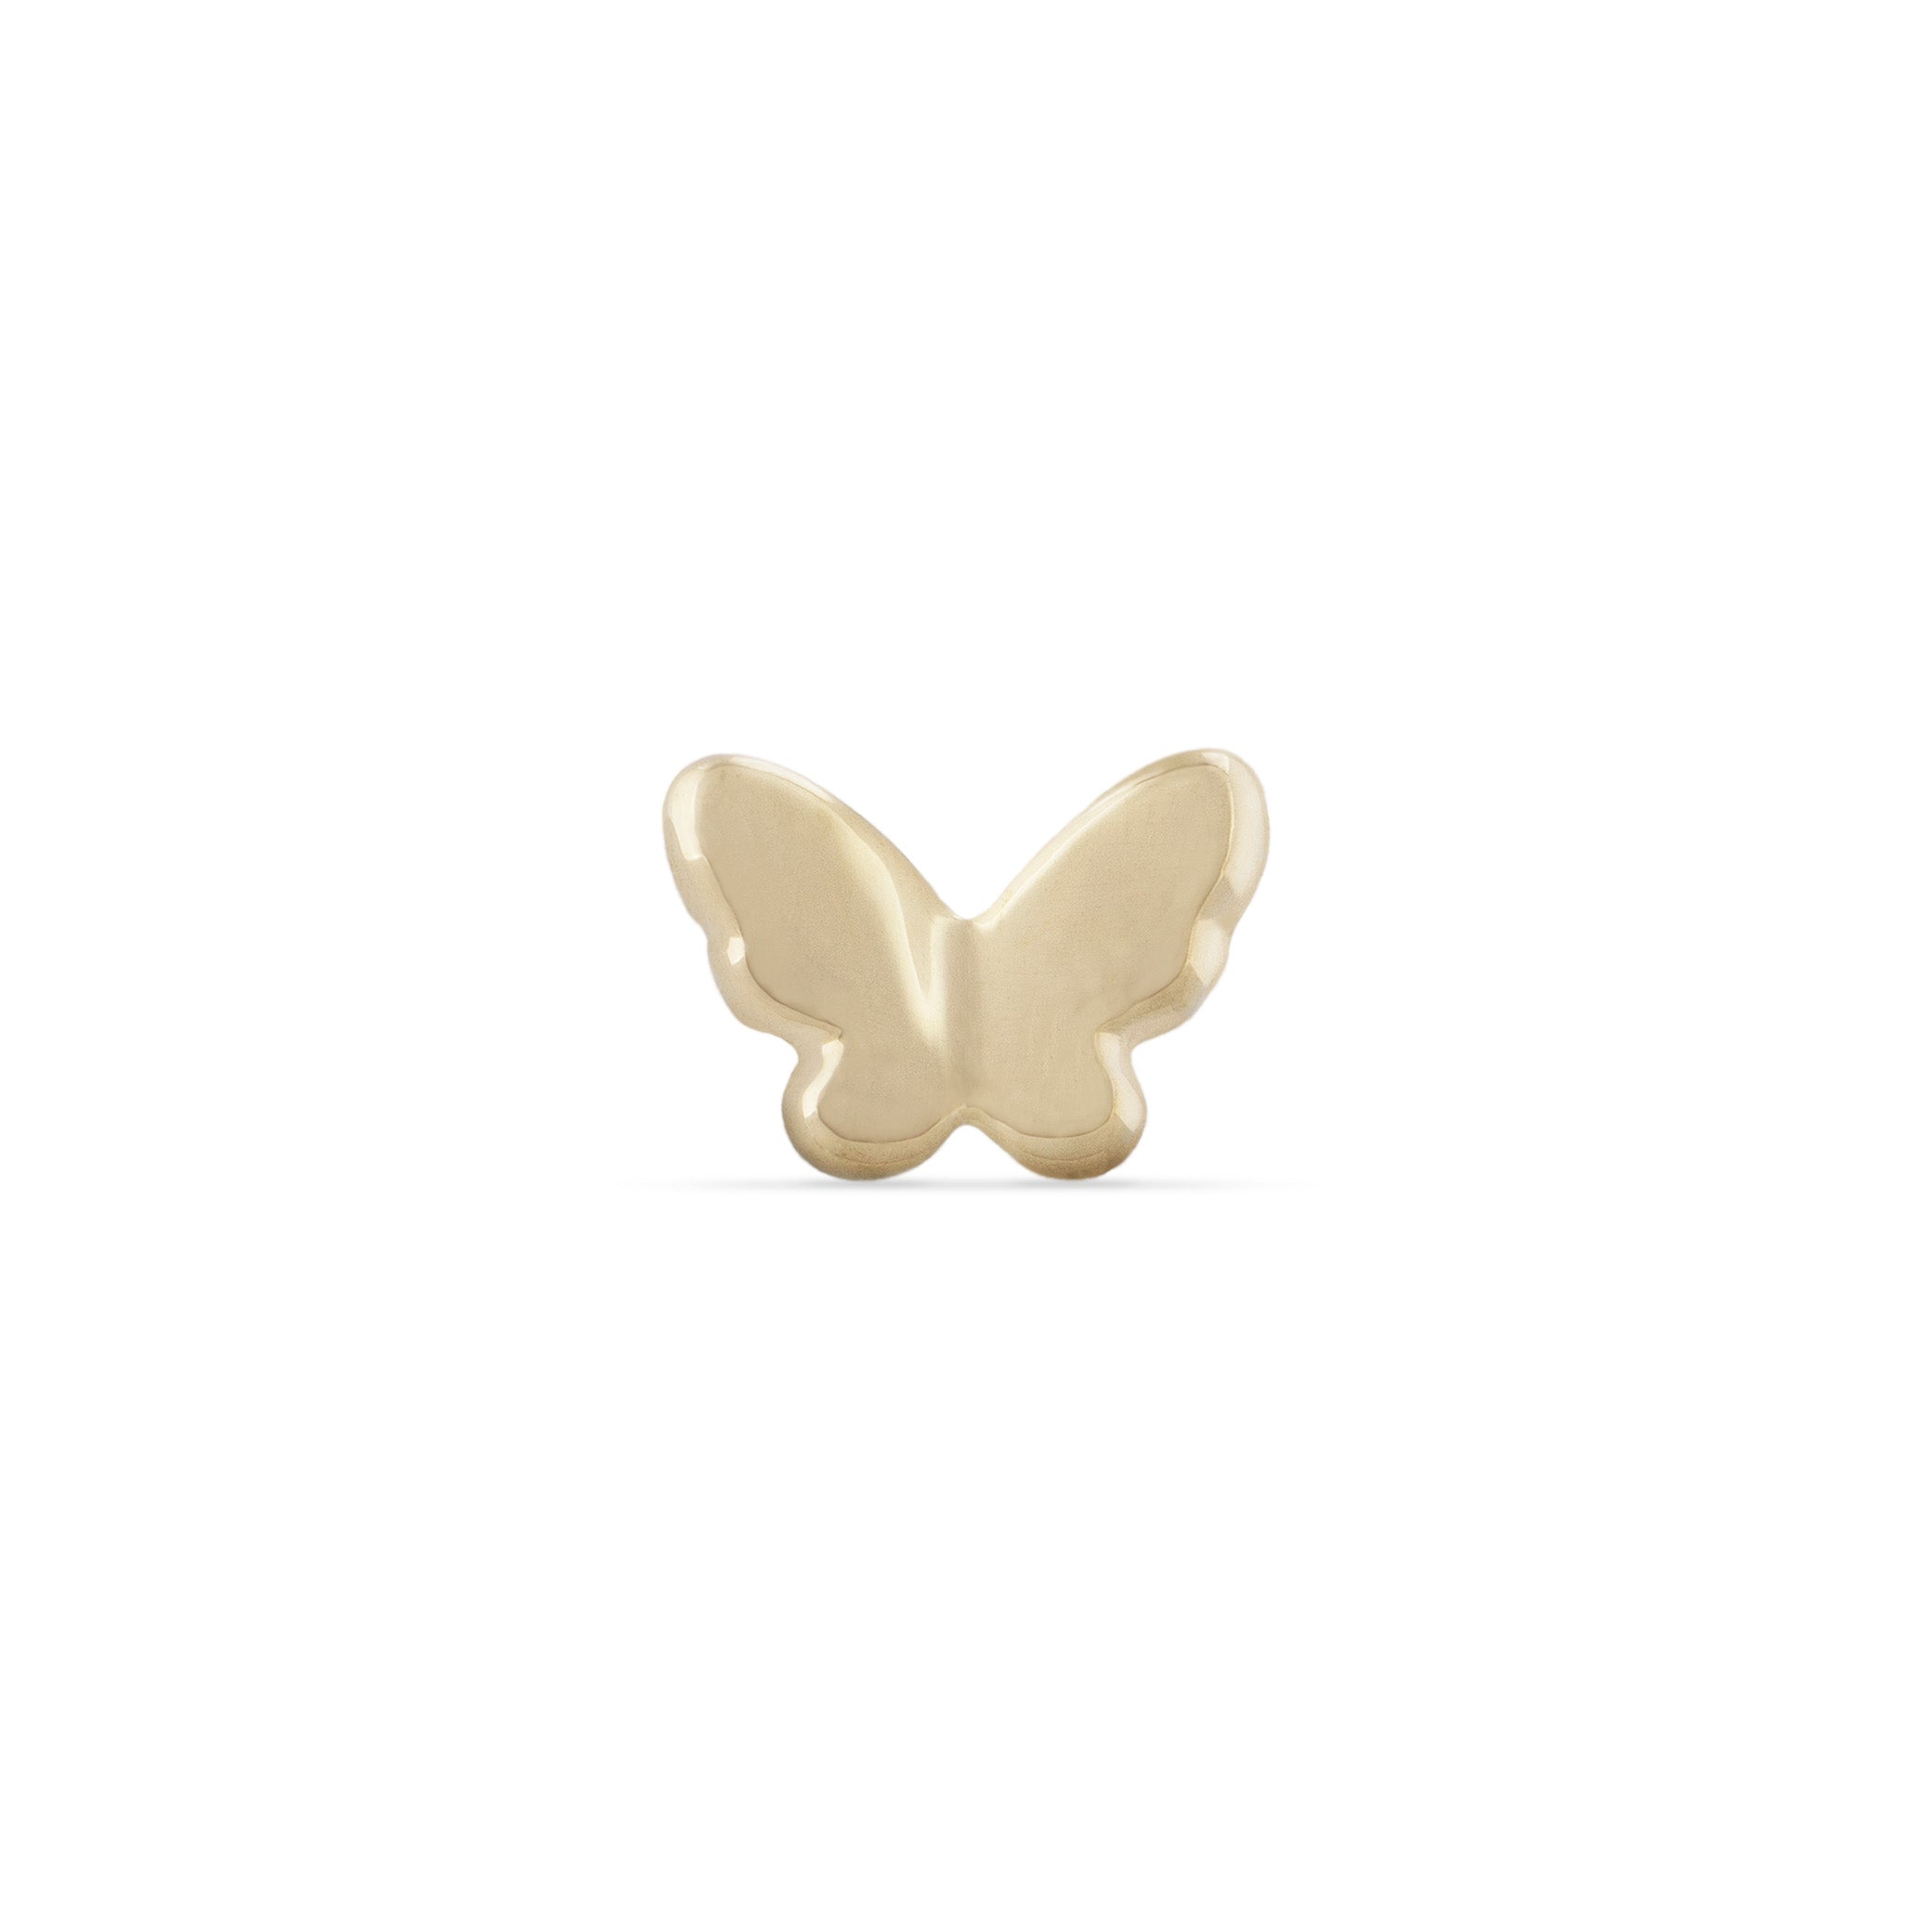 14K Yellow Gold Butterfly Stud Earrings with Screw Back (6mm)